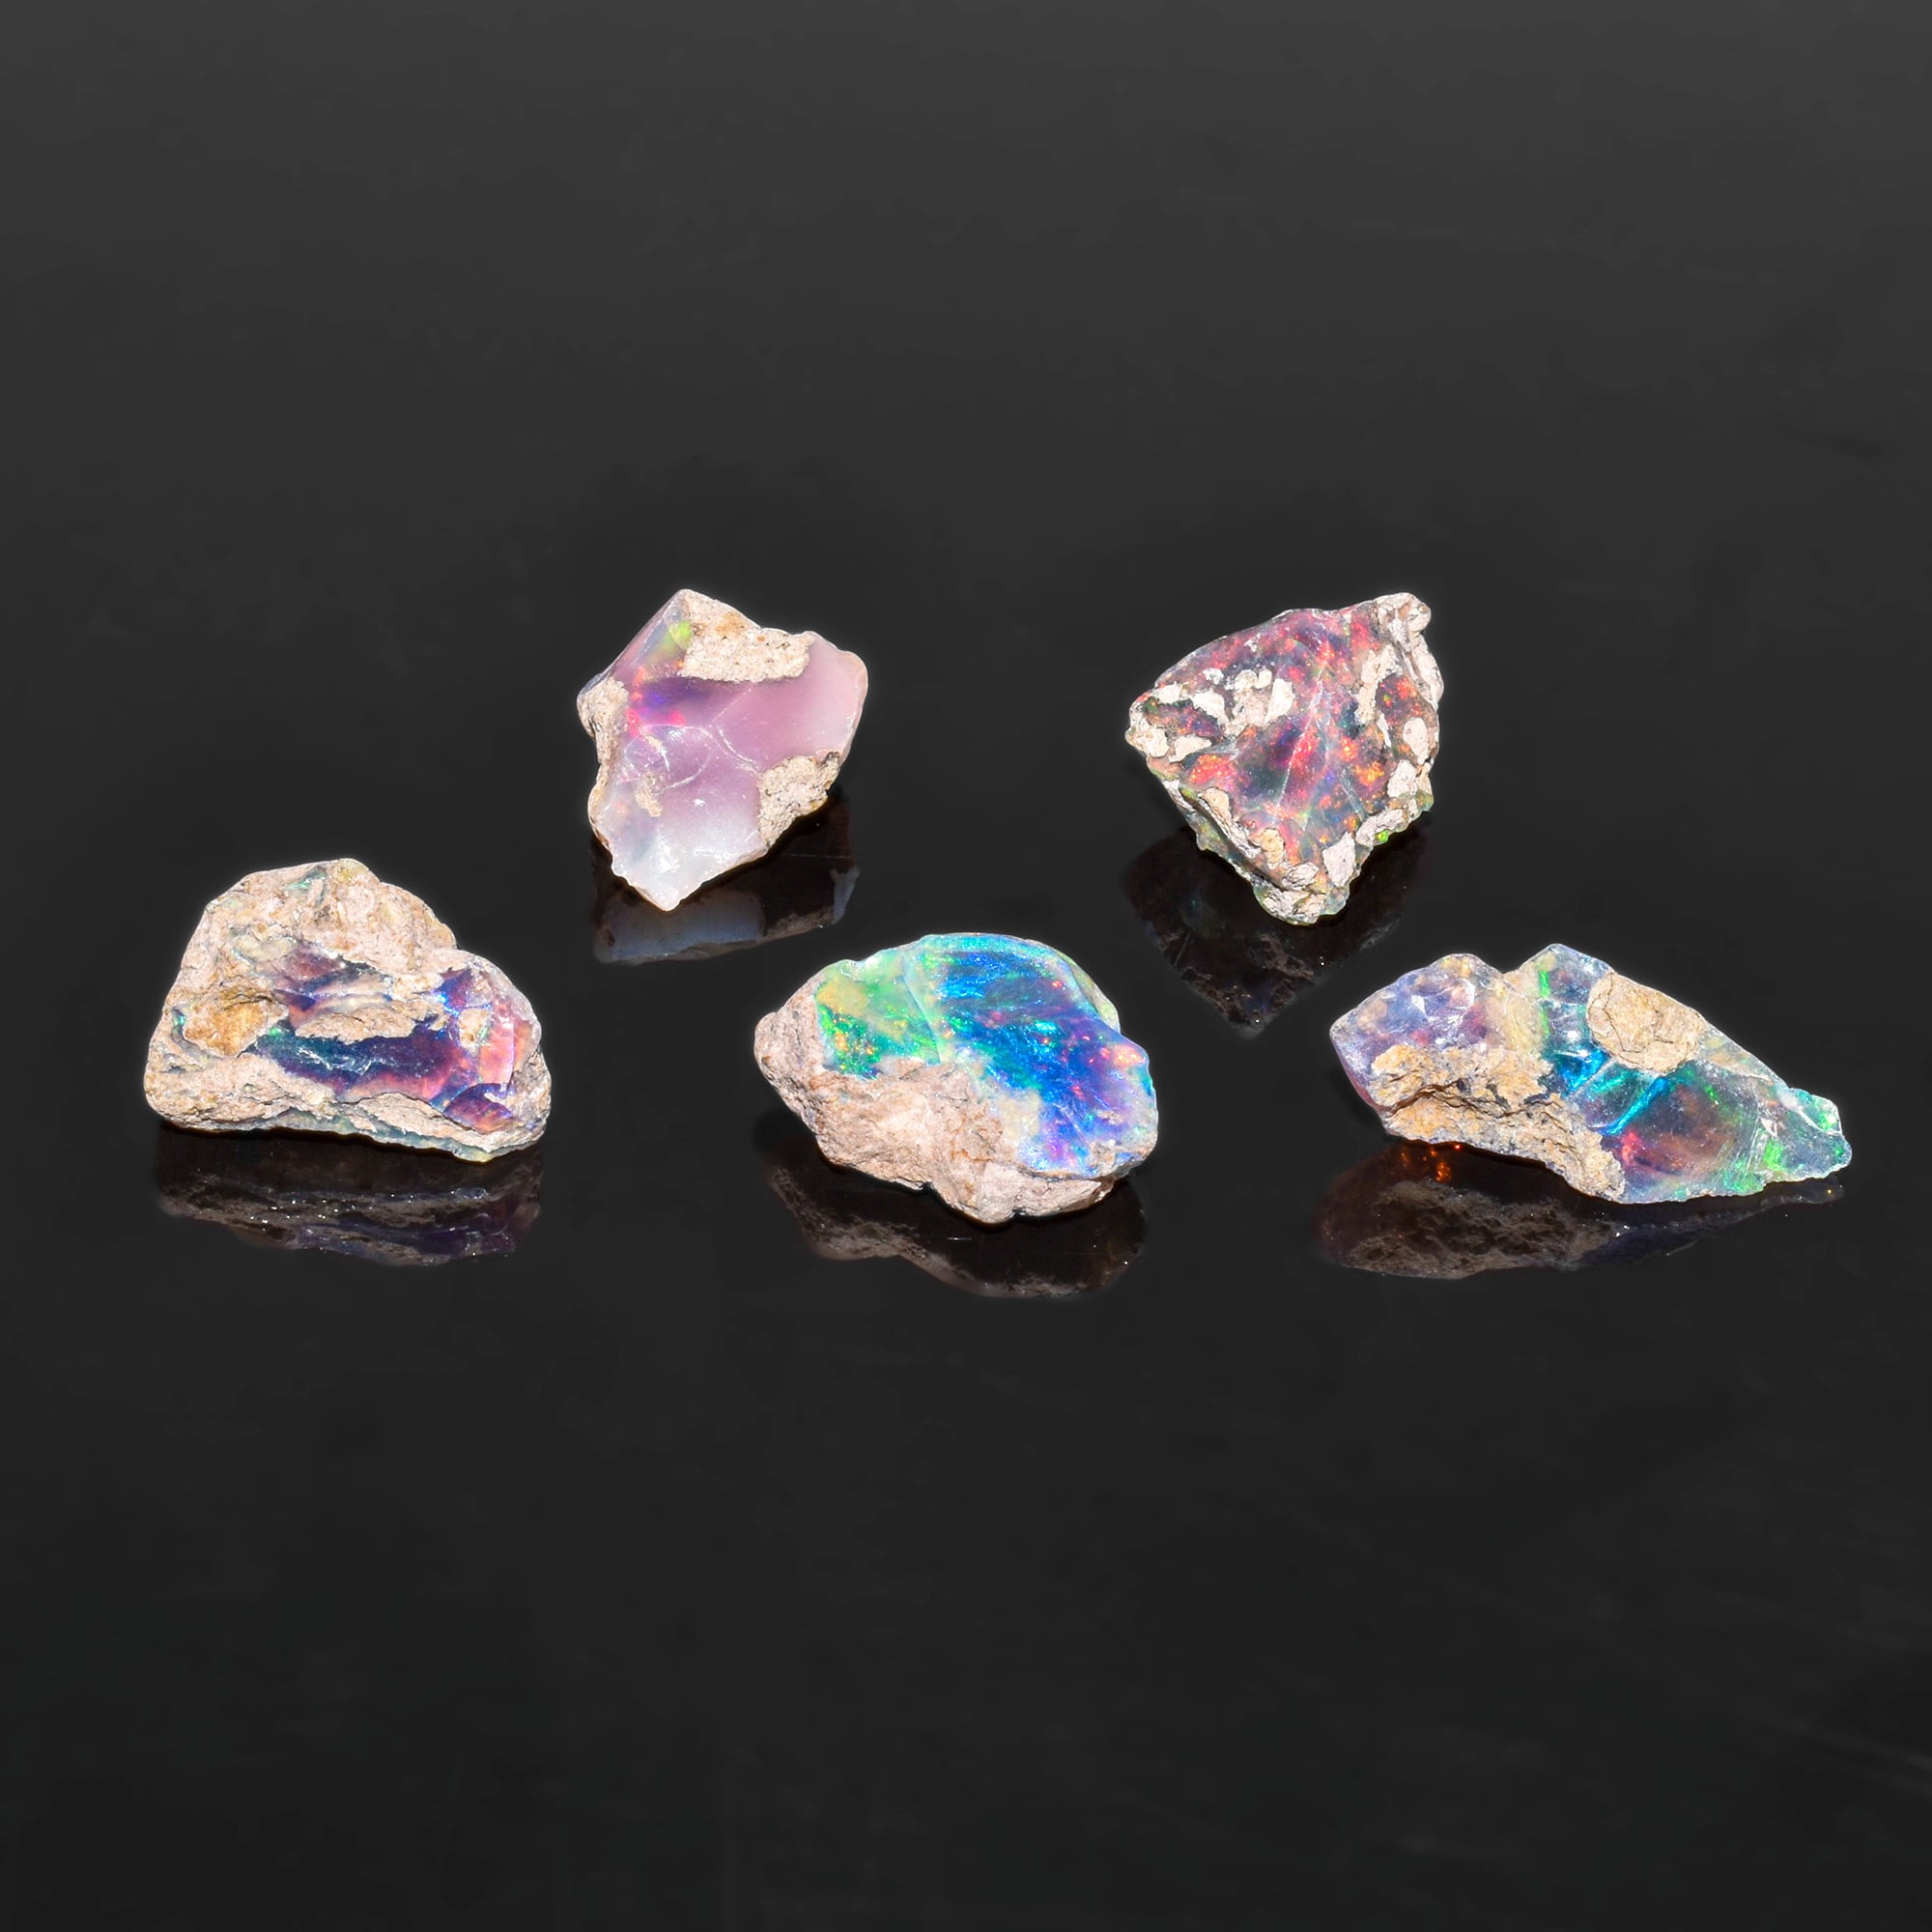 Crystalshop Raw Opal Crystals - 25cts Genuine Natural AAA Grade Opal Gram Lot, Reiki Crystals and Healing Stones,Jewelry Making Gemstone, Ultra Fire